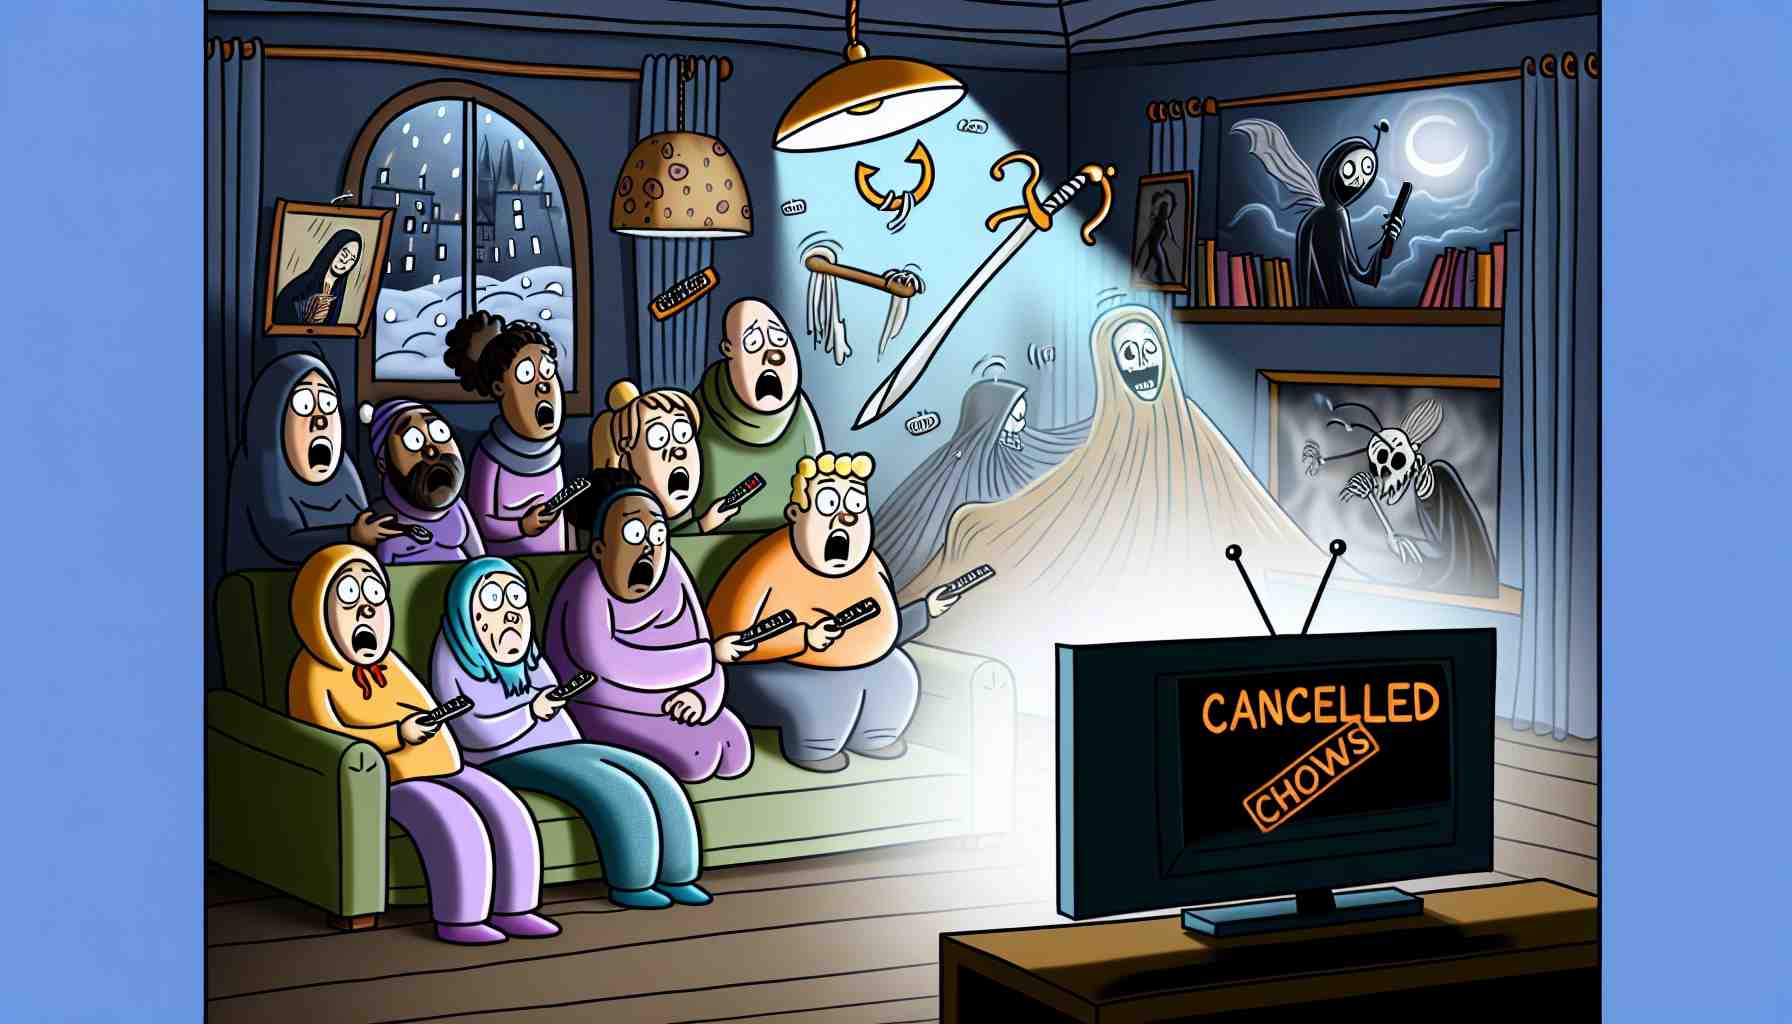 Canceled shows 2024 got you puzzled? Discover the 'why' behind these cancellations, prepare for potential TV heartbreak, and anticipate what's next in our fiery expose.